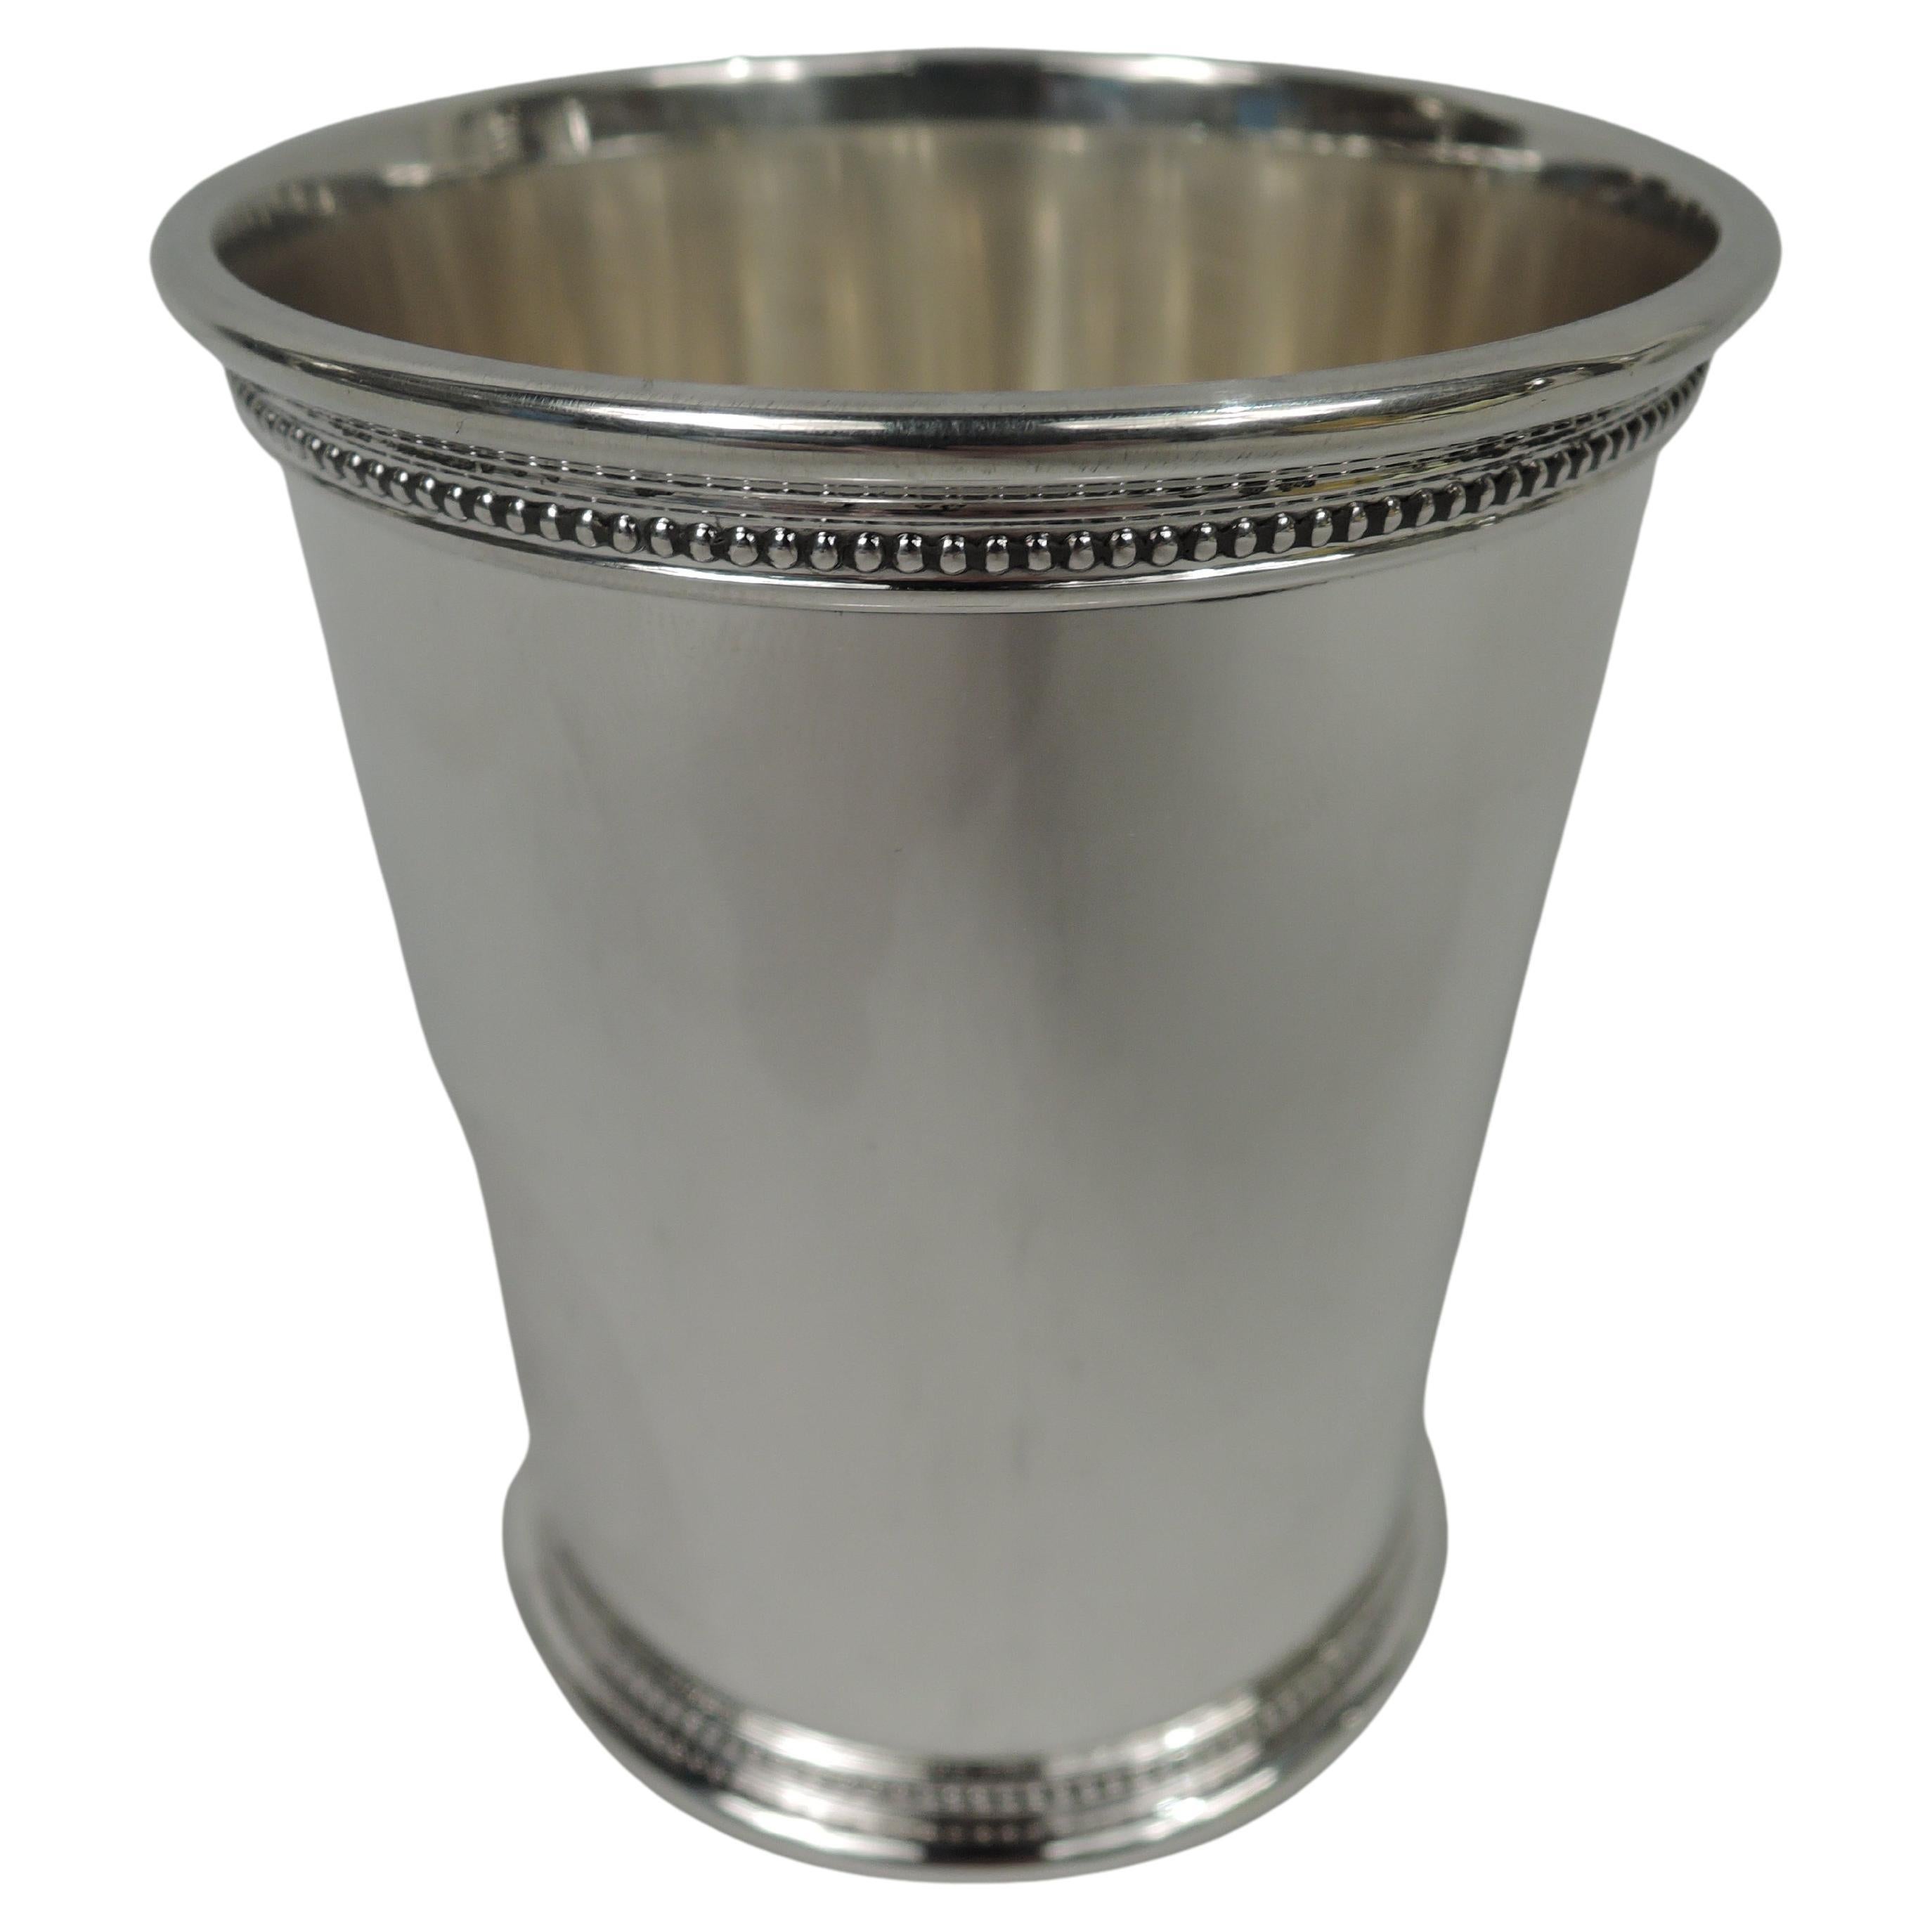 Scearce Reagan Booming Eighties Sterling Silver Mint Julep Cup For Sale